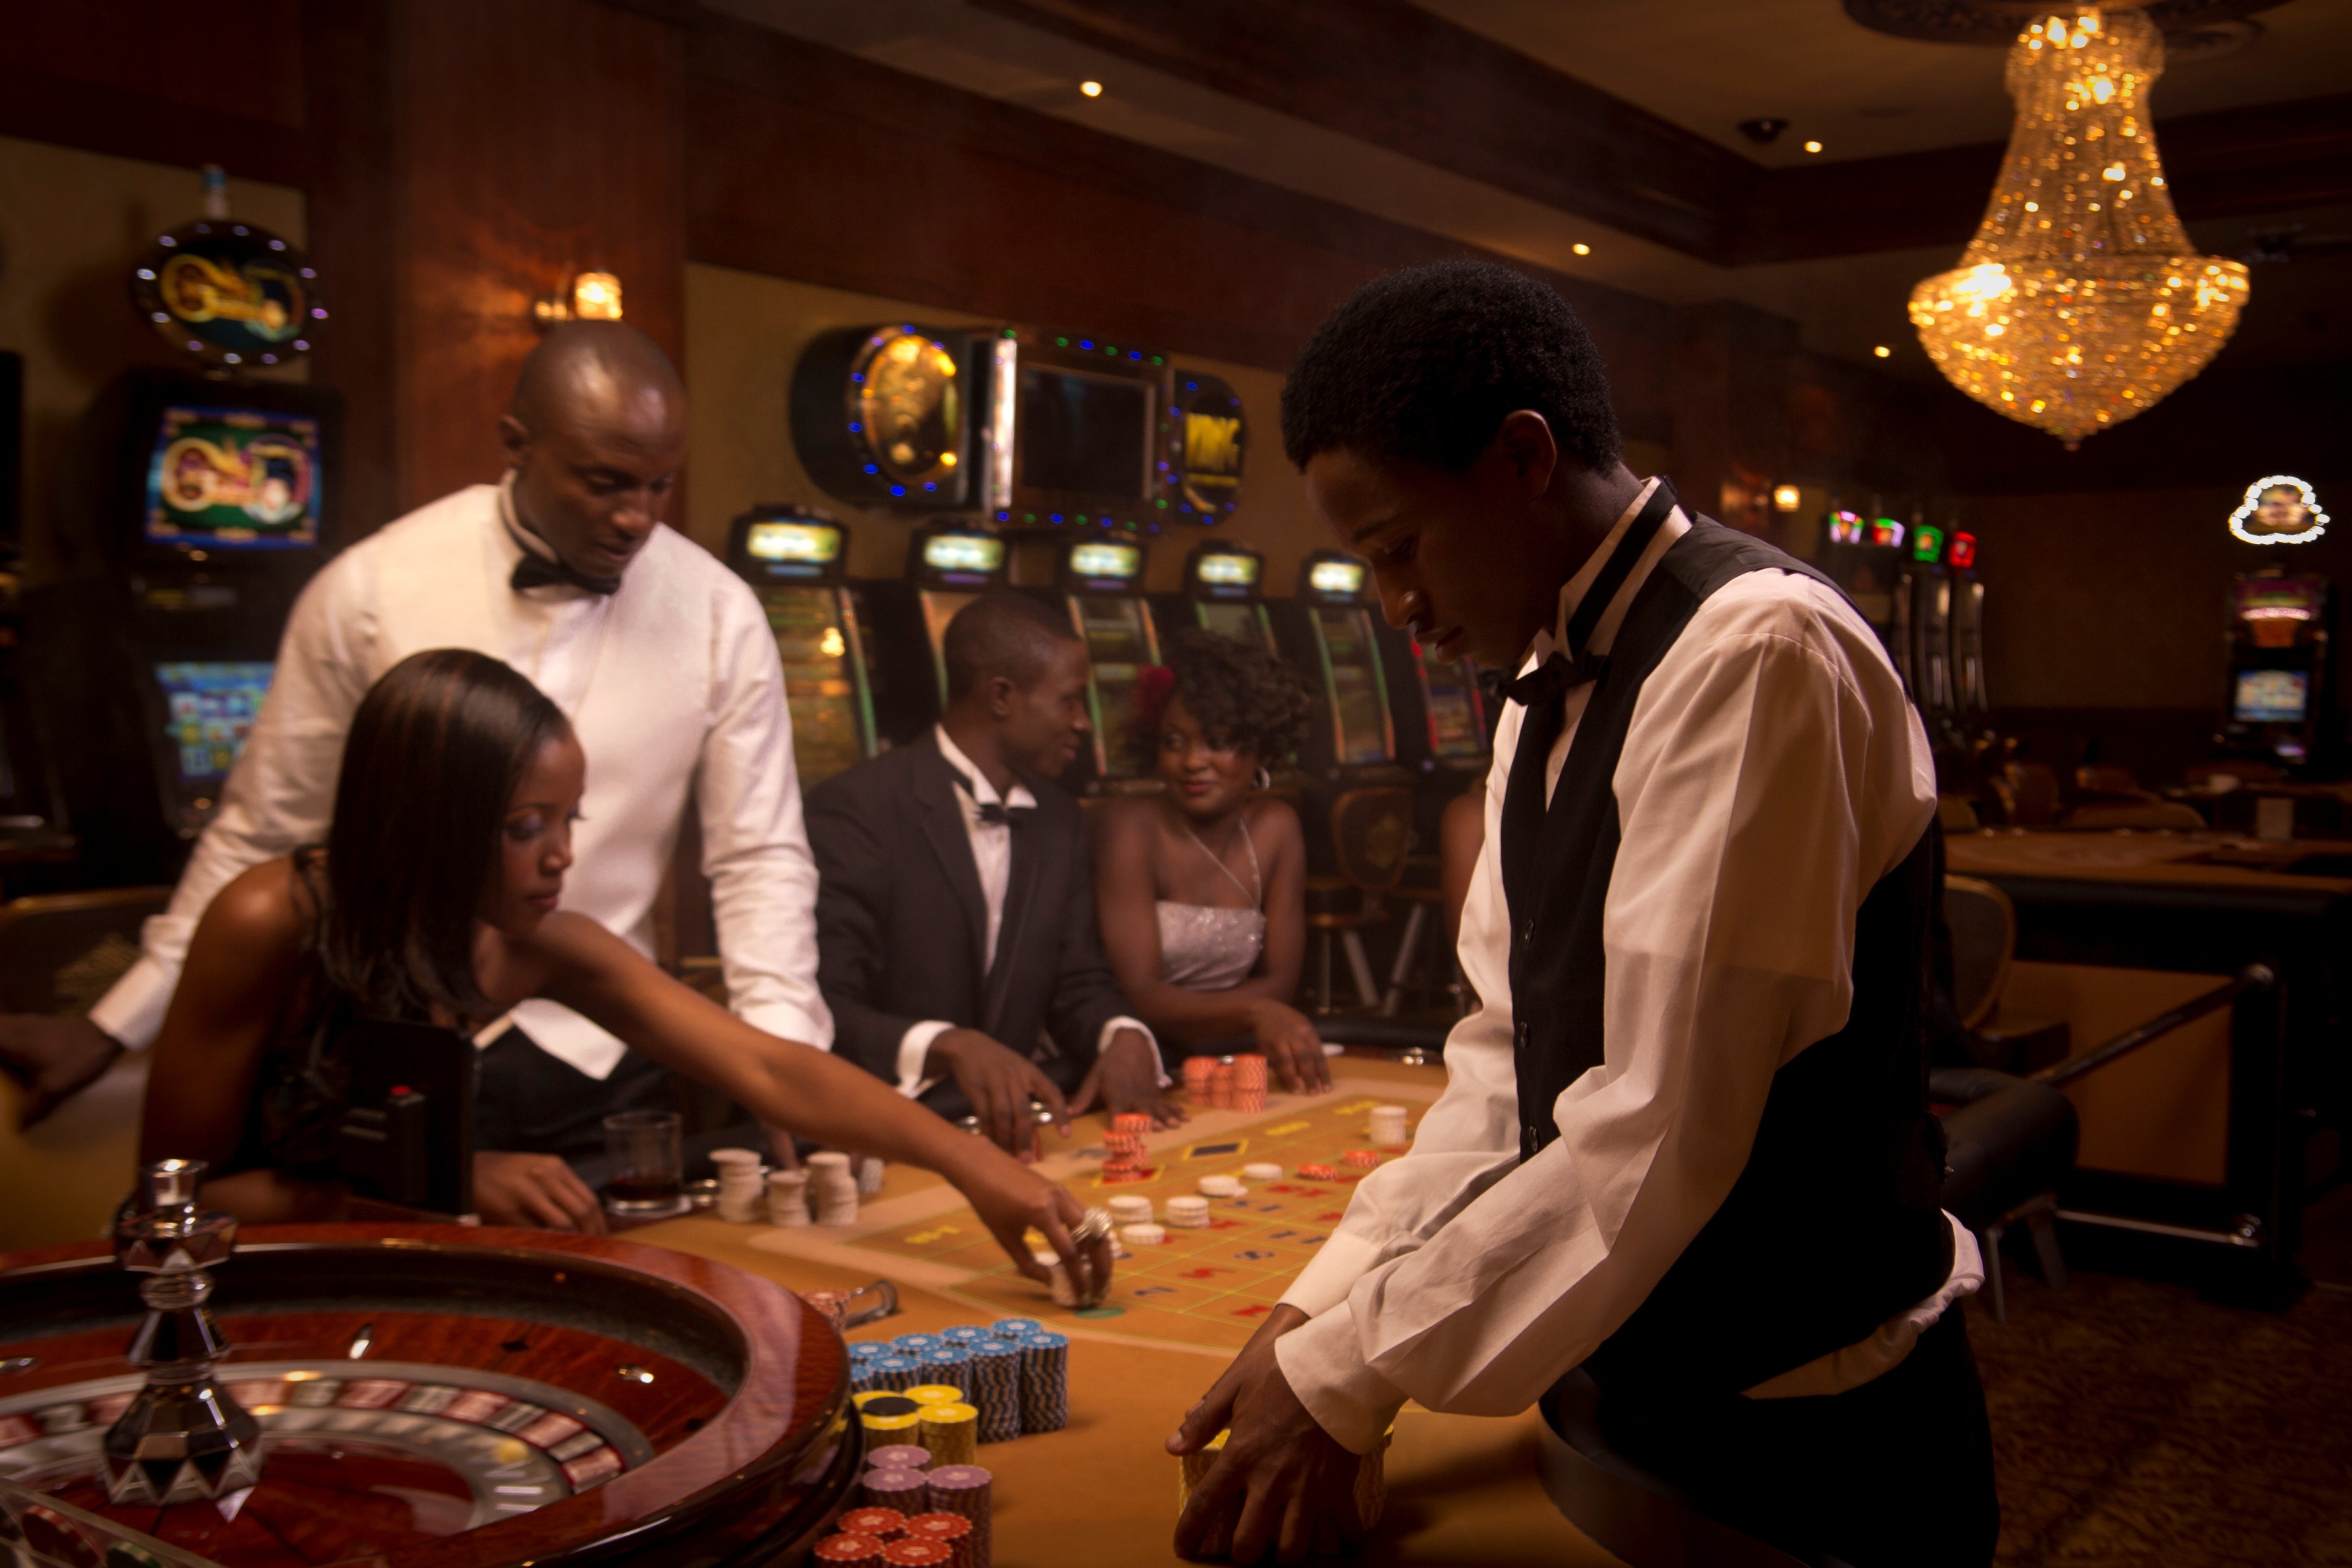 marketers the opportunity to gain from the fastest niche in the casino industry